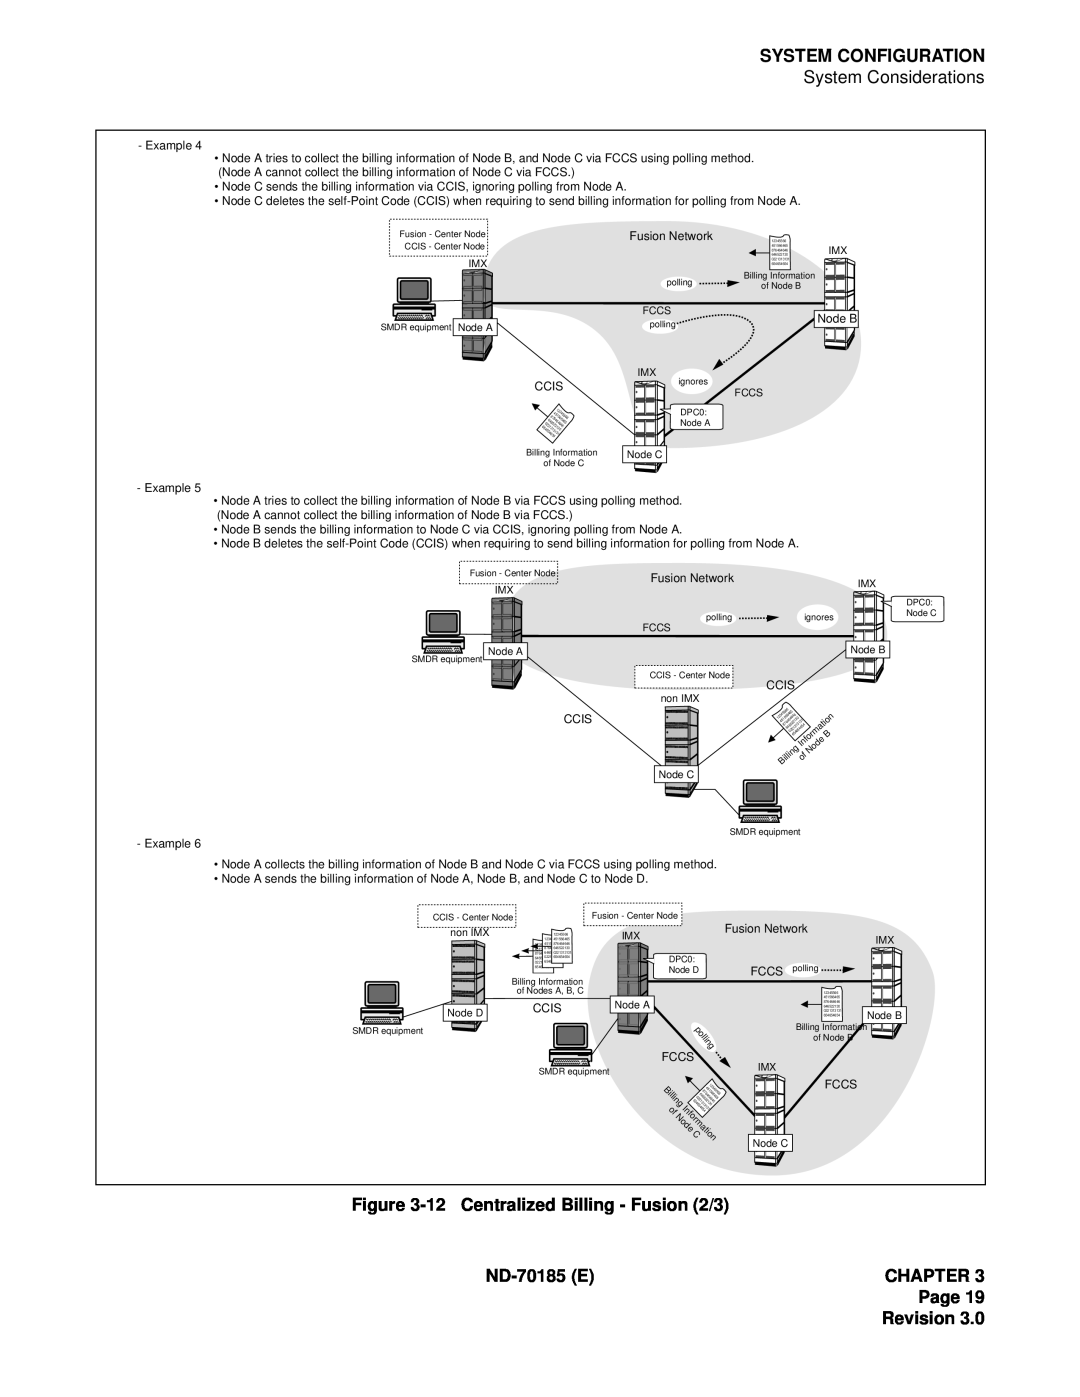 NEC NEAX2400 System Configuration, 12Centralized Billing - Fusion 2/3, ND-70185ECHAPTER Page Revision, polling 